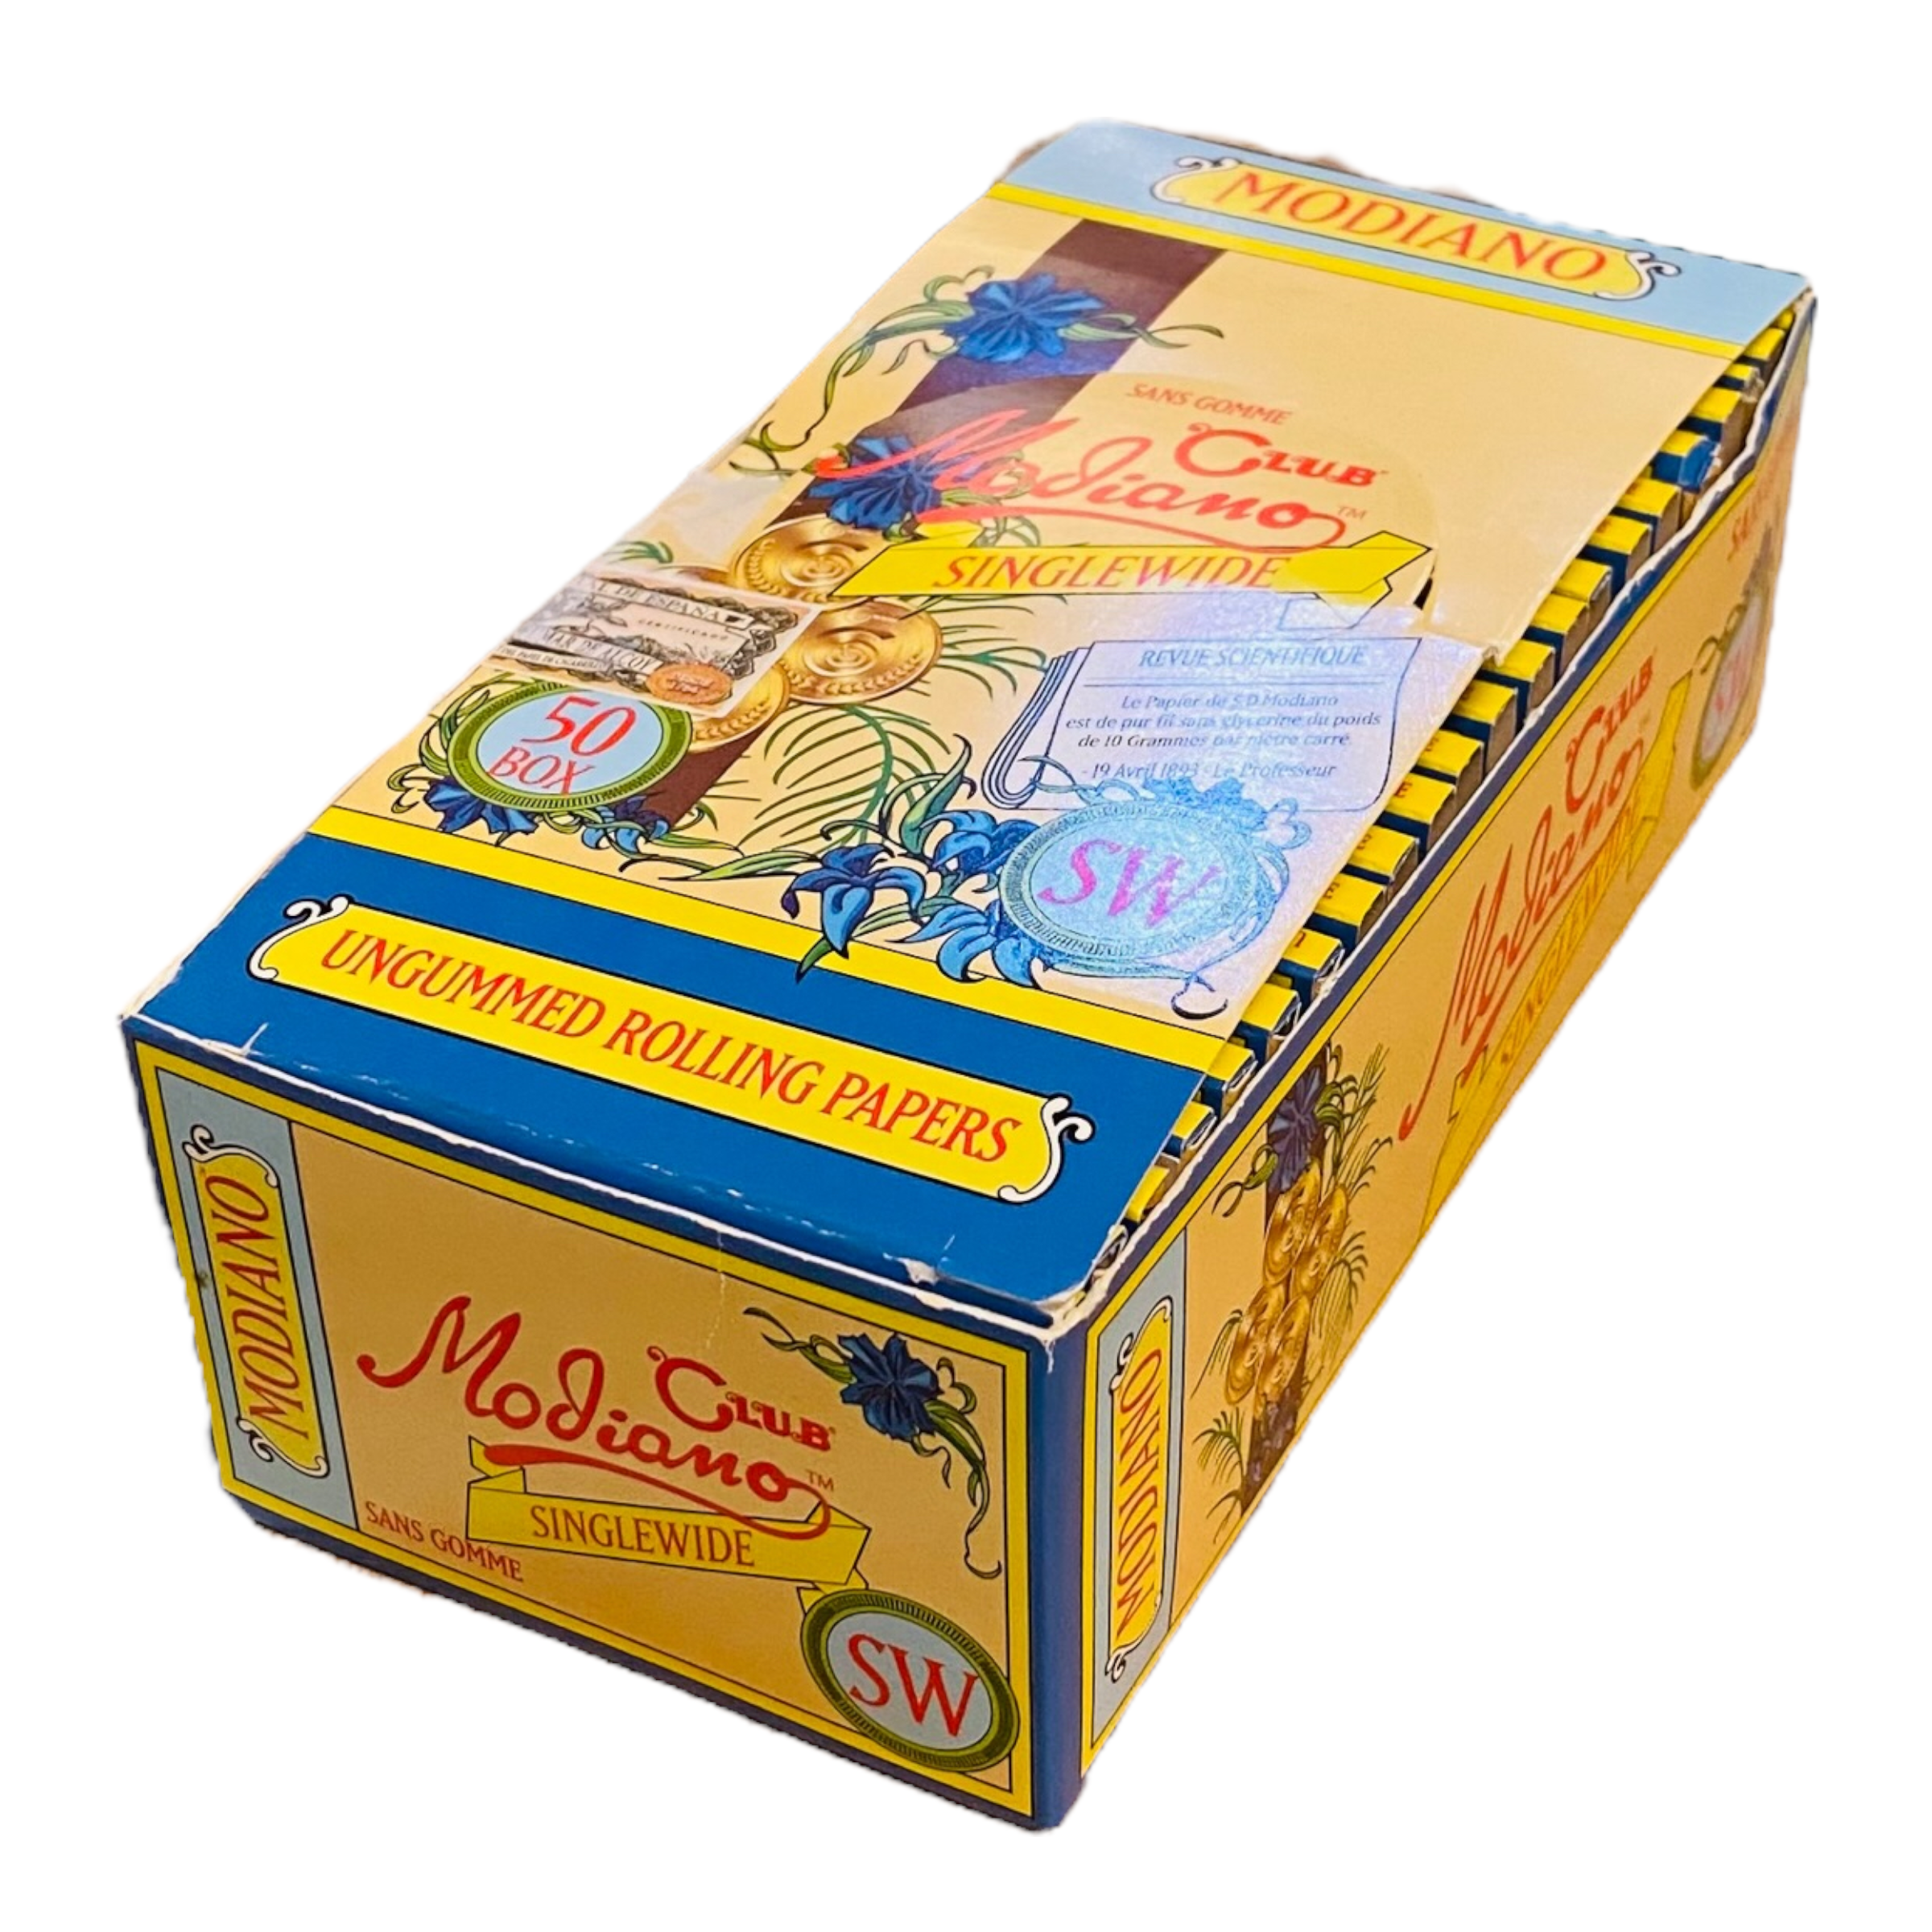 Club Modiano - BOX Of Single Wide UnGummed Papers - 50 Pack Box